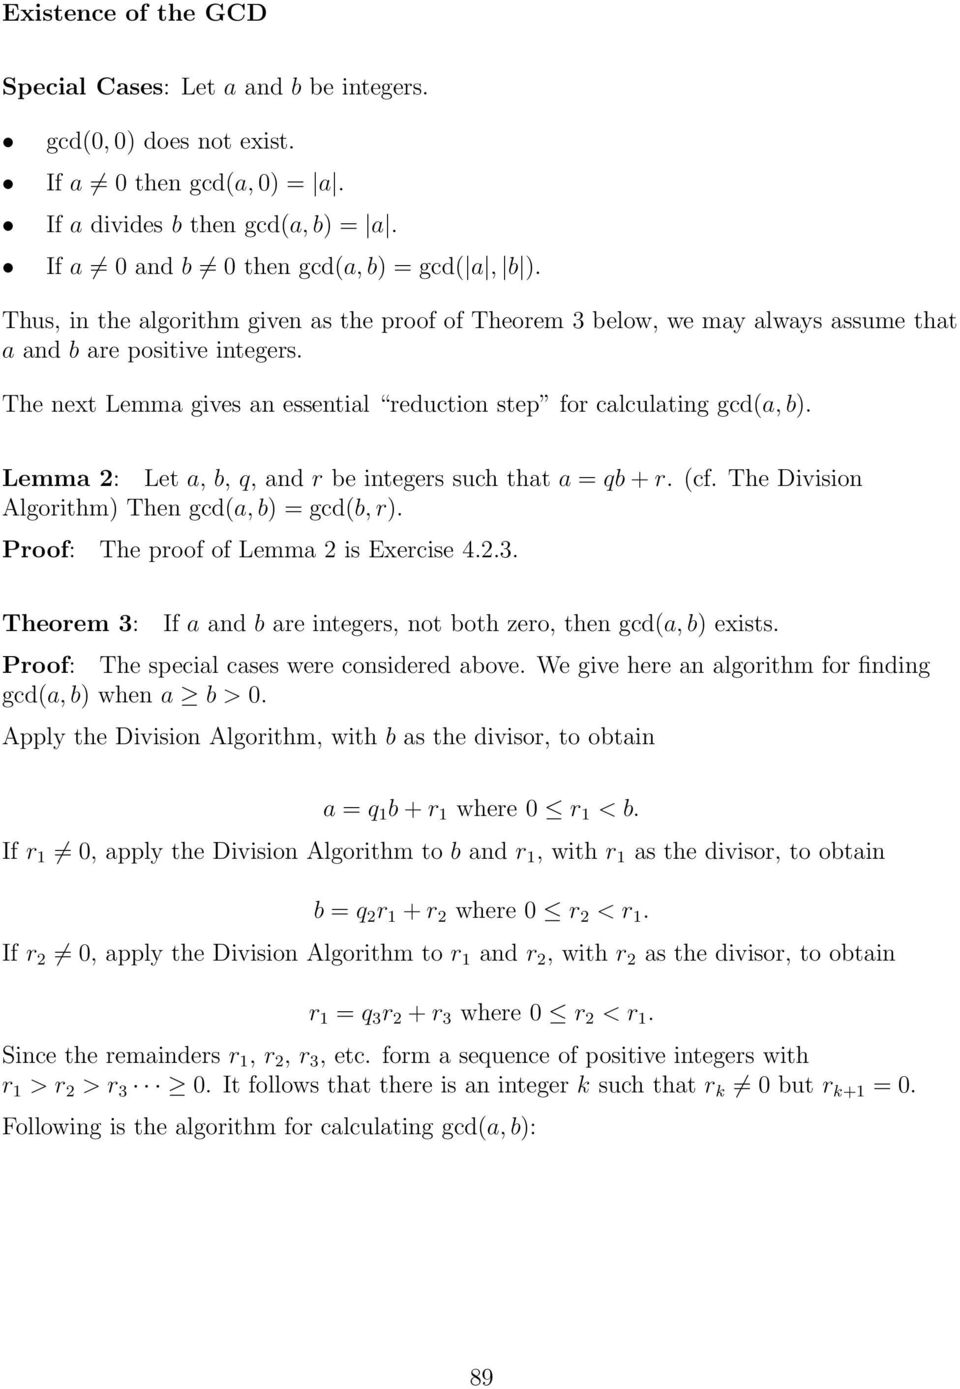 Lemma 2: Let a, b, q, and r be integers such that a = qb + r. (cf. The Division Algorithm) Then gcd(a, b) = gcd(b, r). Proof: The proof of Lemma 2 is Exercise 4.2.3.